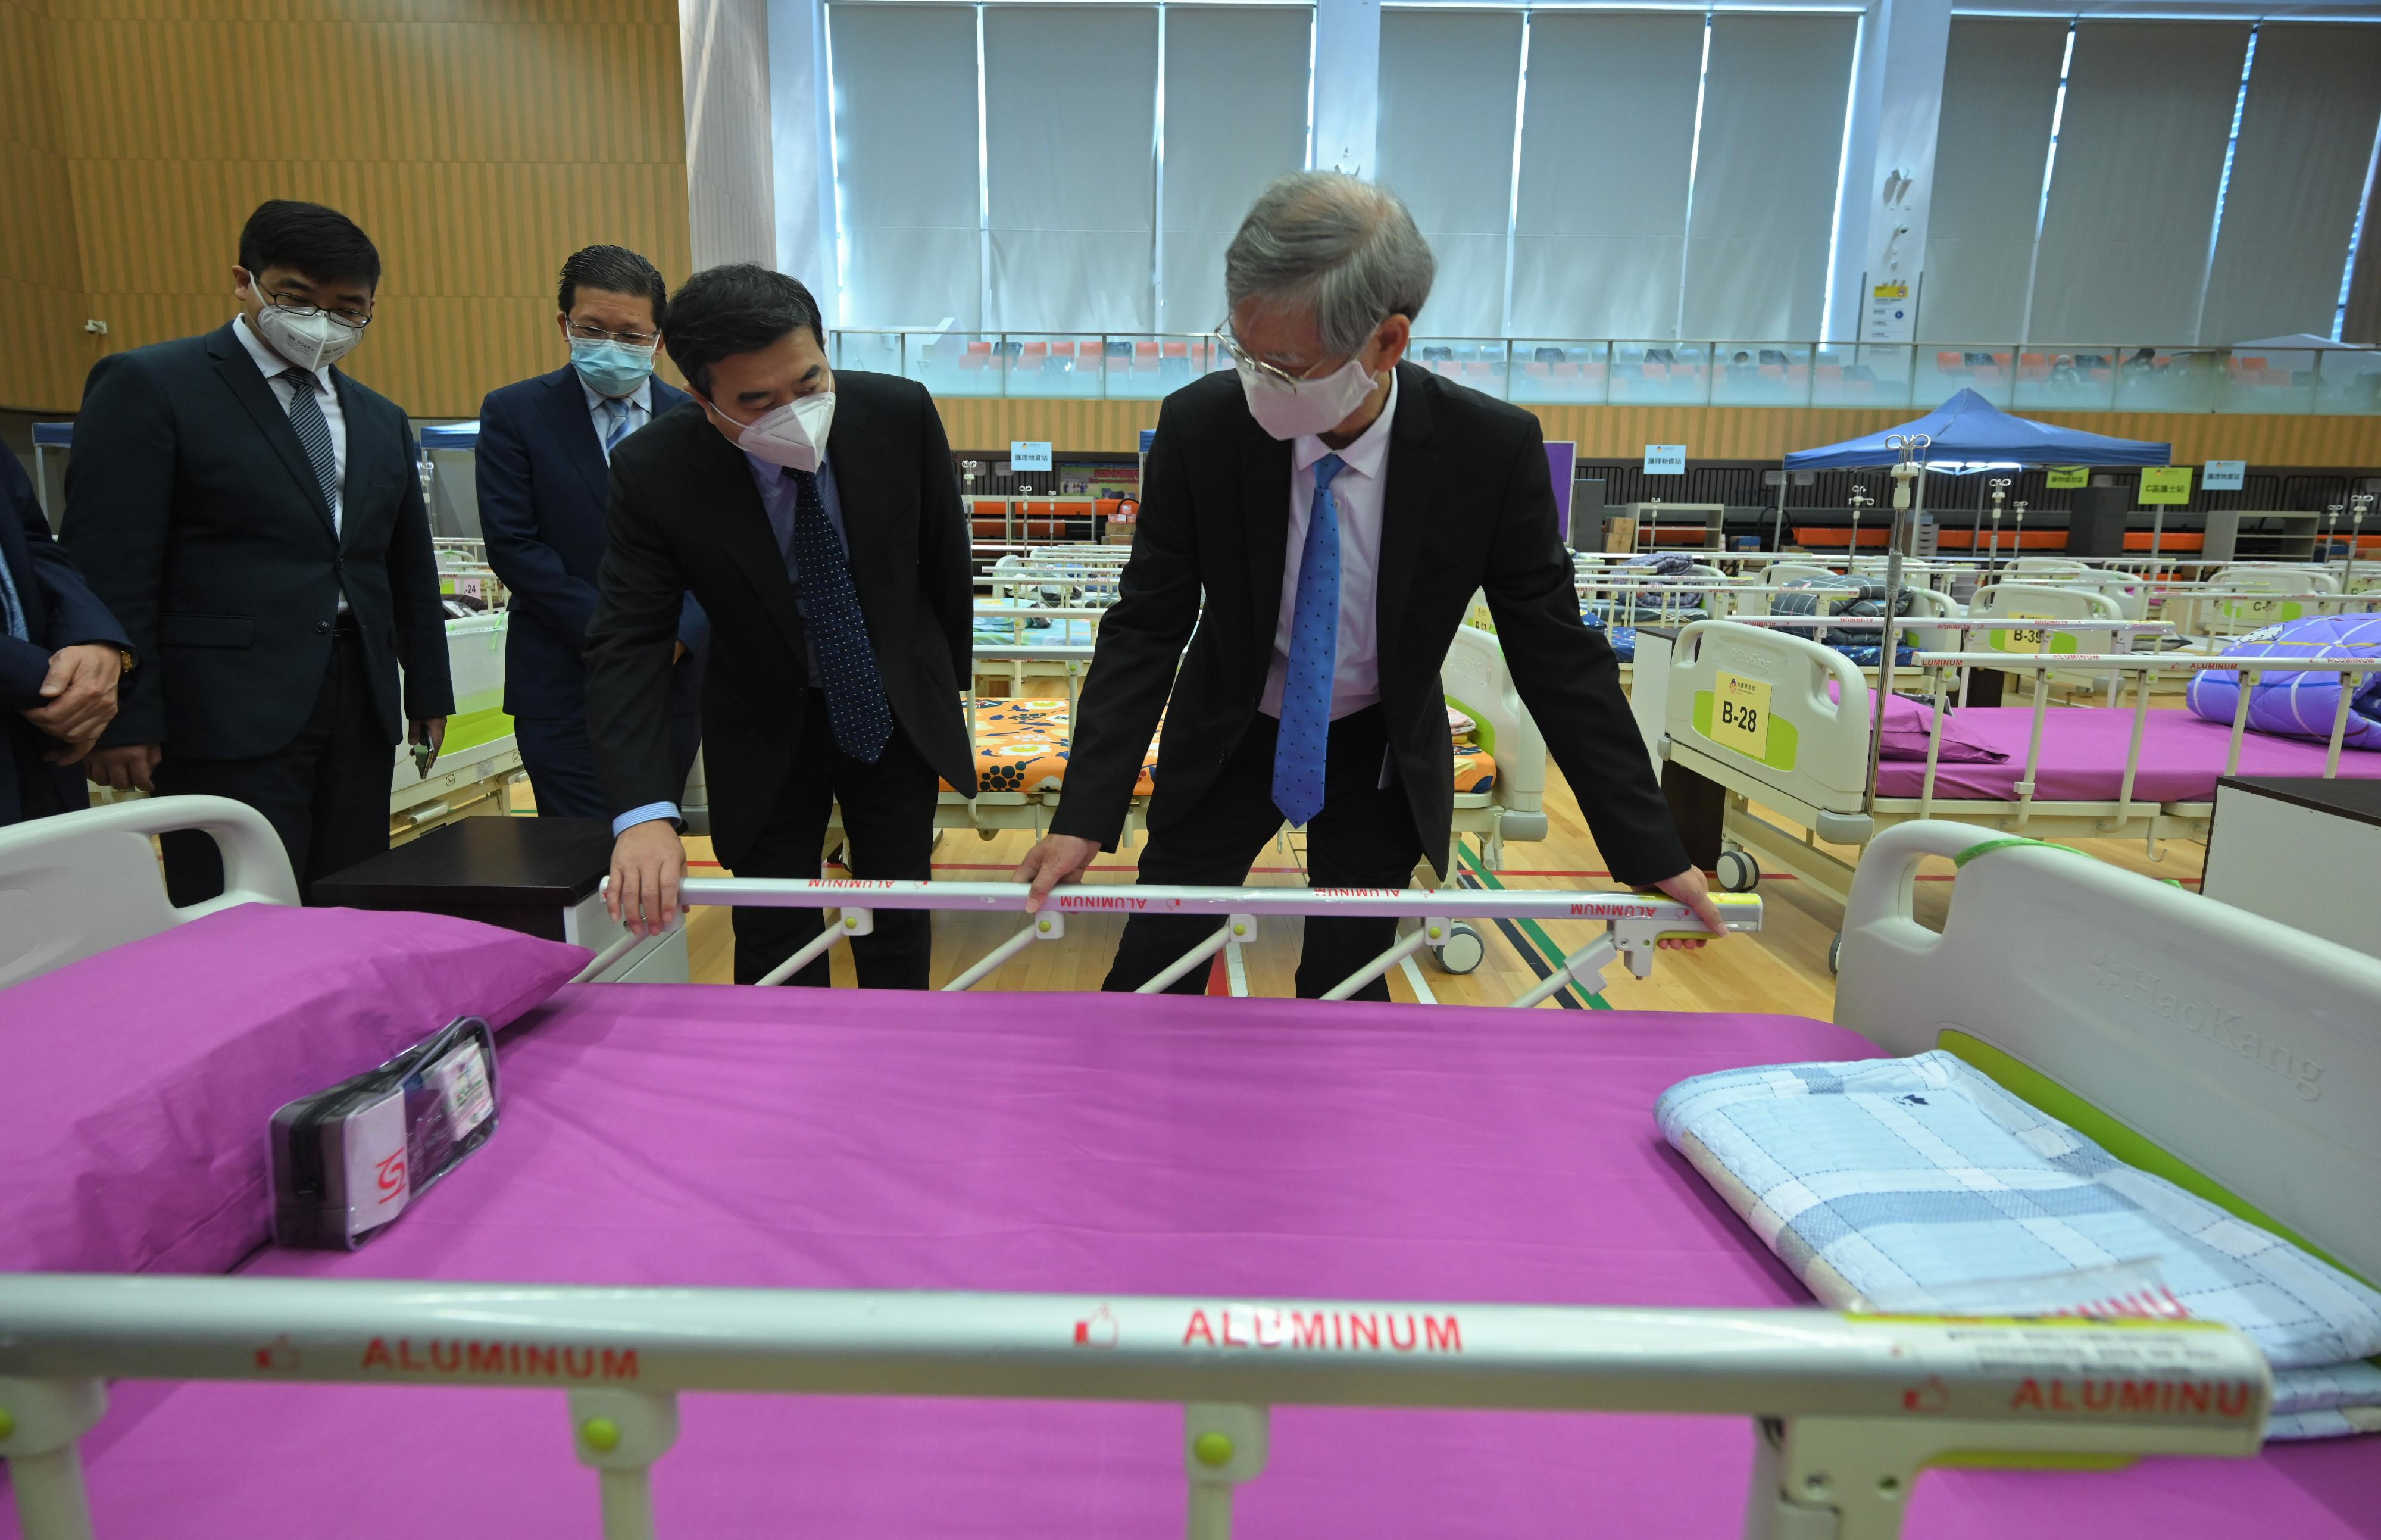 The Secretary for Labour and Welfare, Dr Law Chi-kwong, today (March 14) conveyed his appreciation to China Resources Charity Foundation for its donation of 1 000 hospital beds to the Social Welfare Department and assistance to the Government to set up isolation and holding centres in various sports centres. Photo shows Dr Law (first right) and the Assistant General Manager of China Resources Group and Chairman of the Board and Chief Executive Officer of China Resources Enterprise, Mr Chen Ying (second right), taking a closer look at the installation of hospital beds in Harbour Road Sports Centre in Wan Chai and how they facilitate elderly care.